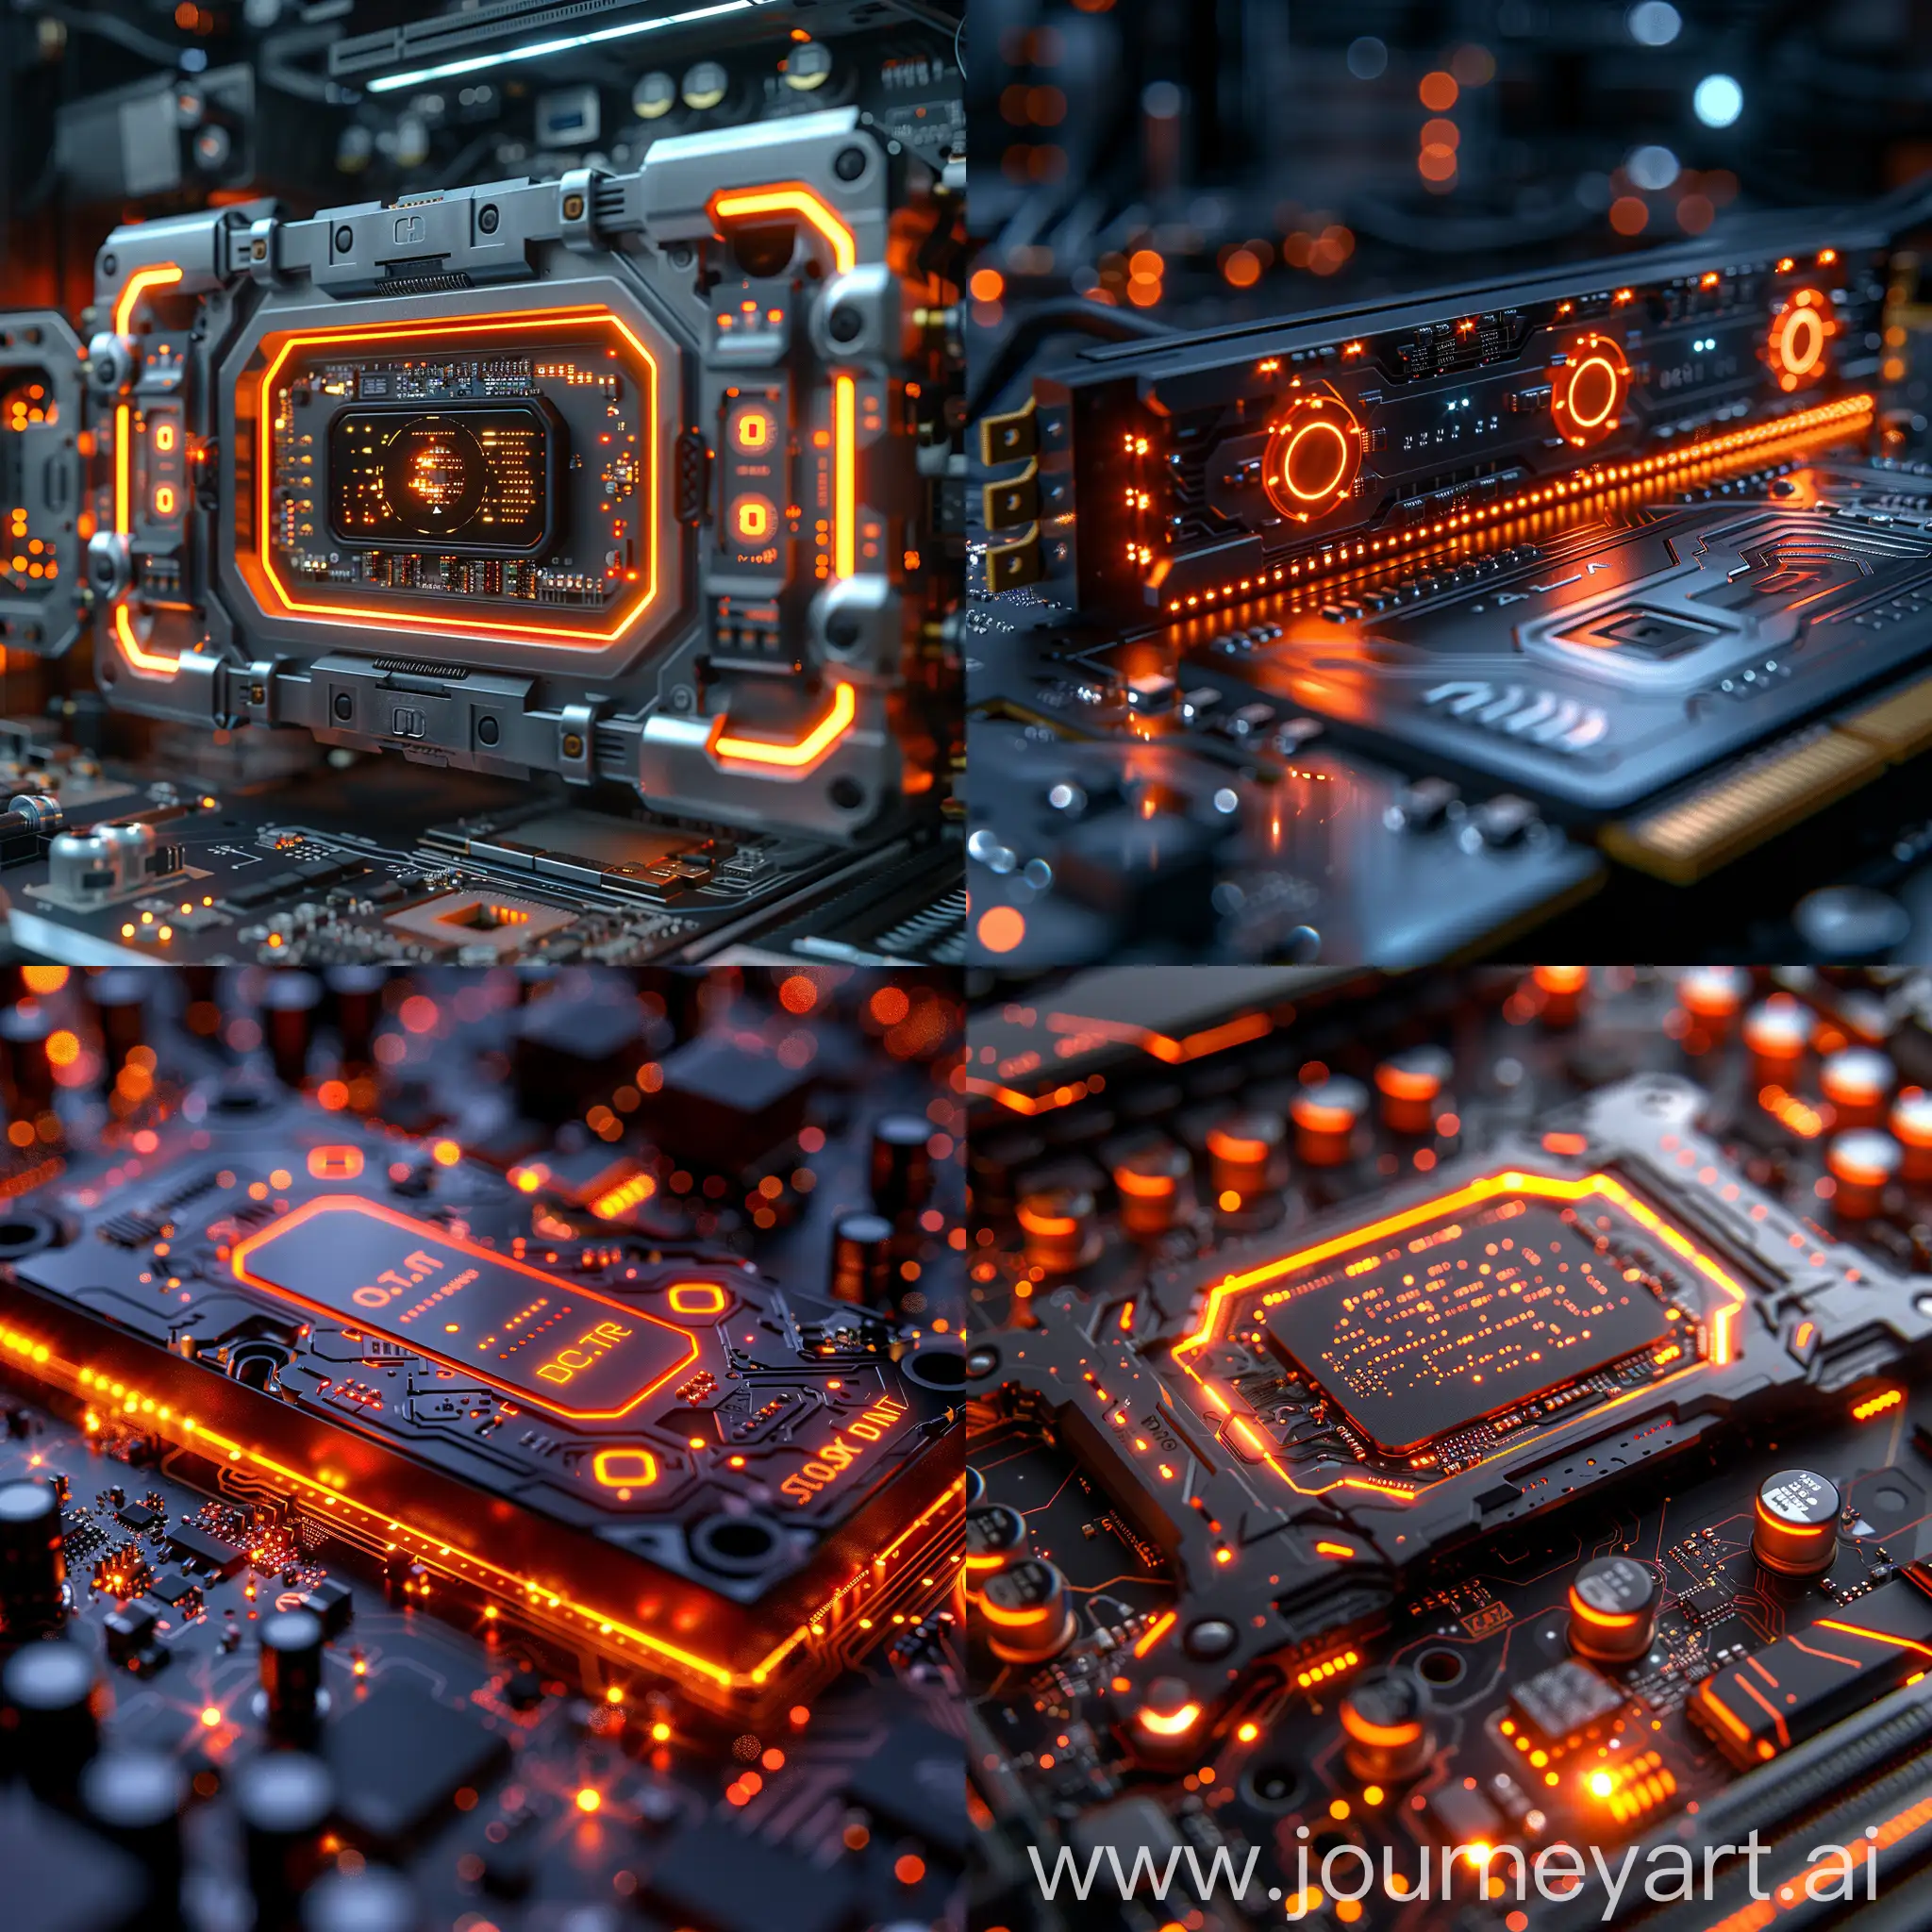 Futuristic PC SSD, futuristic features, Self-Destructing Data. Quantum Tunneling Storage, DNA Storage, AI-powered Data Management, Self-Healing Technology, Heat Dissipation Innovations, Wireless Connectivity, 3D Stacked NAND, Self-Encrypting Drives with Enhanced Security, Biometric Authentication, octane render --stylize 1000